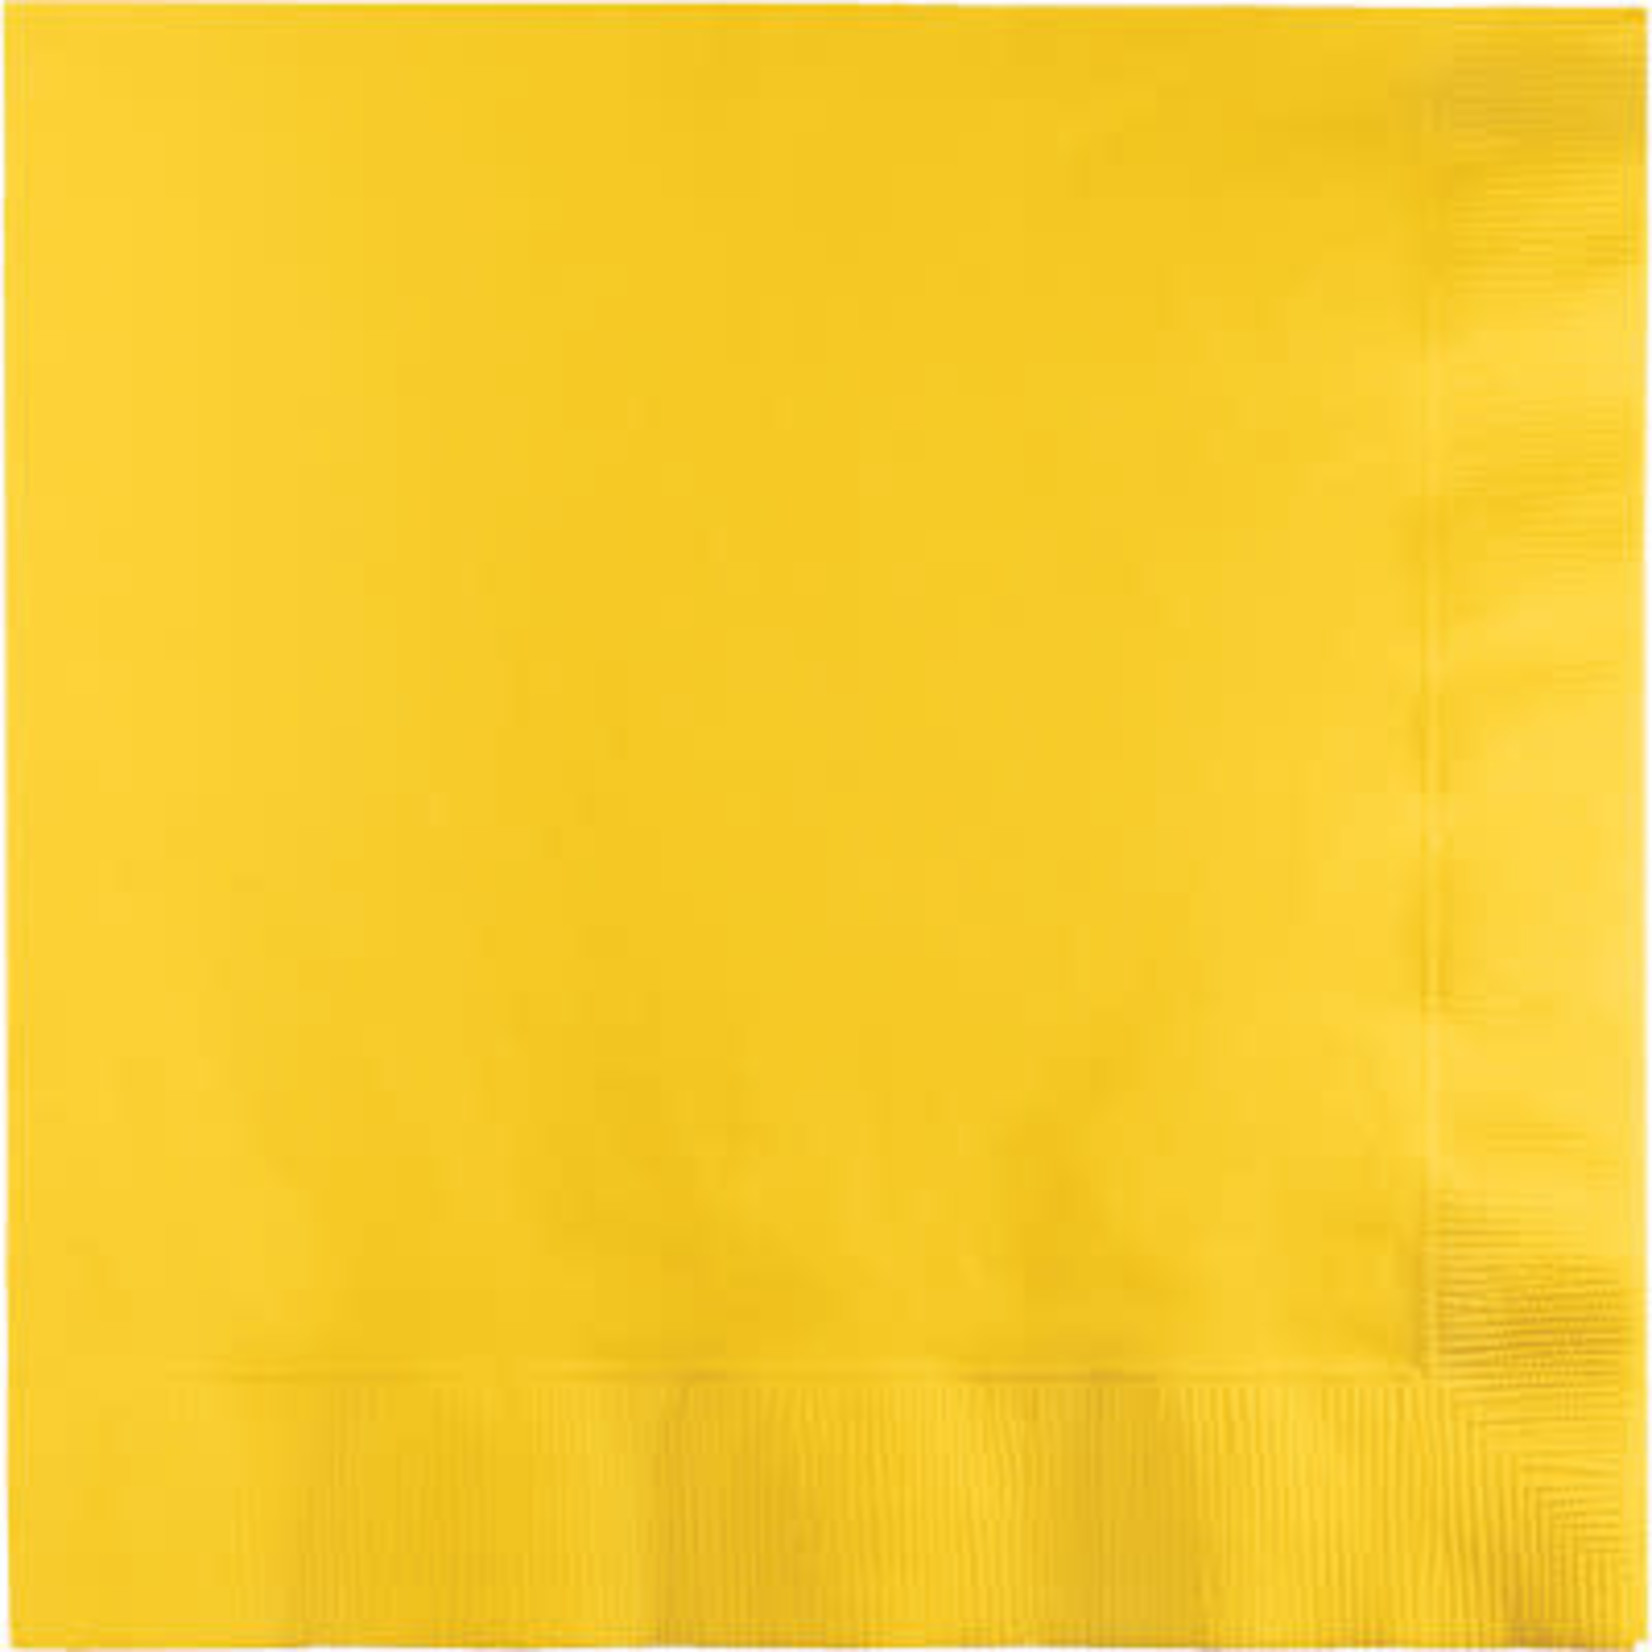 Touch of Color School Bus Yellow 3-Ply Dinner Napkins - 25ct.